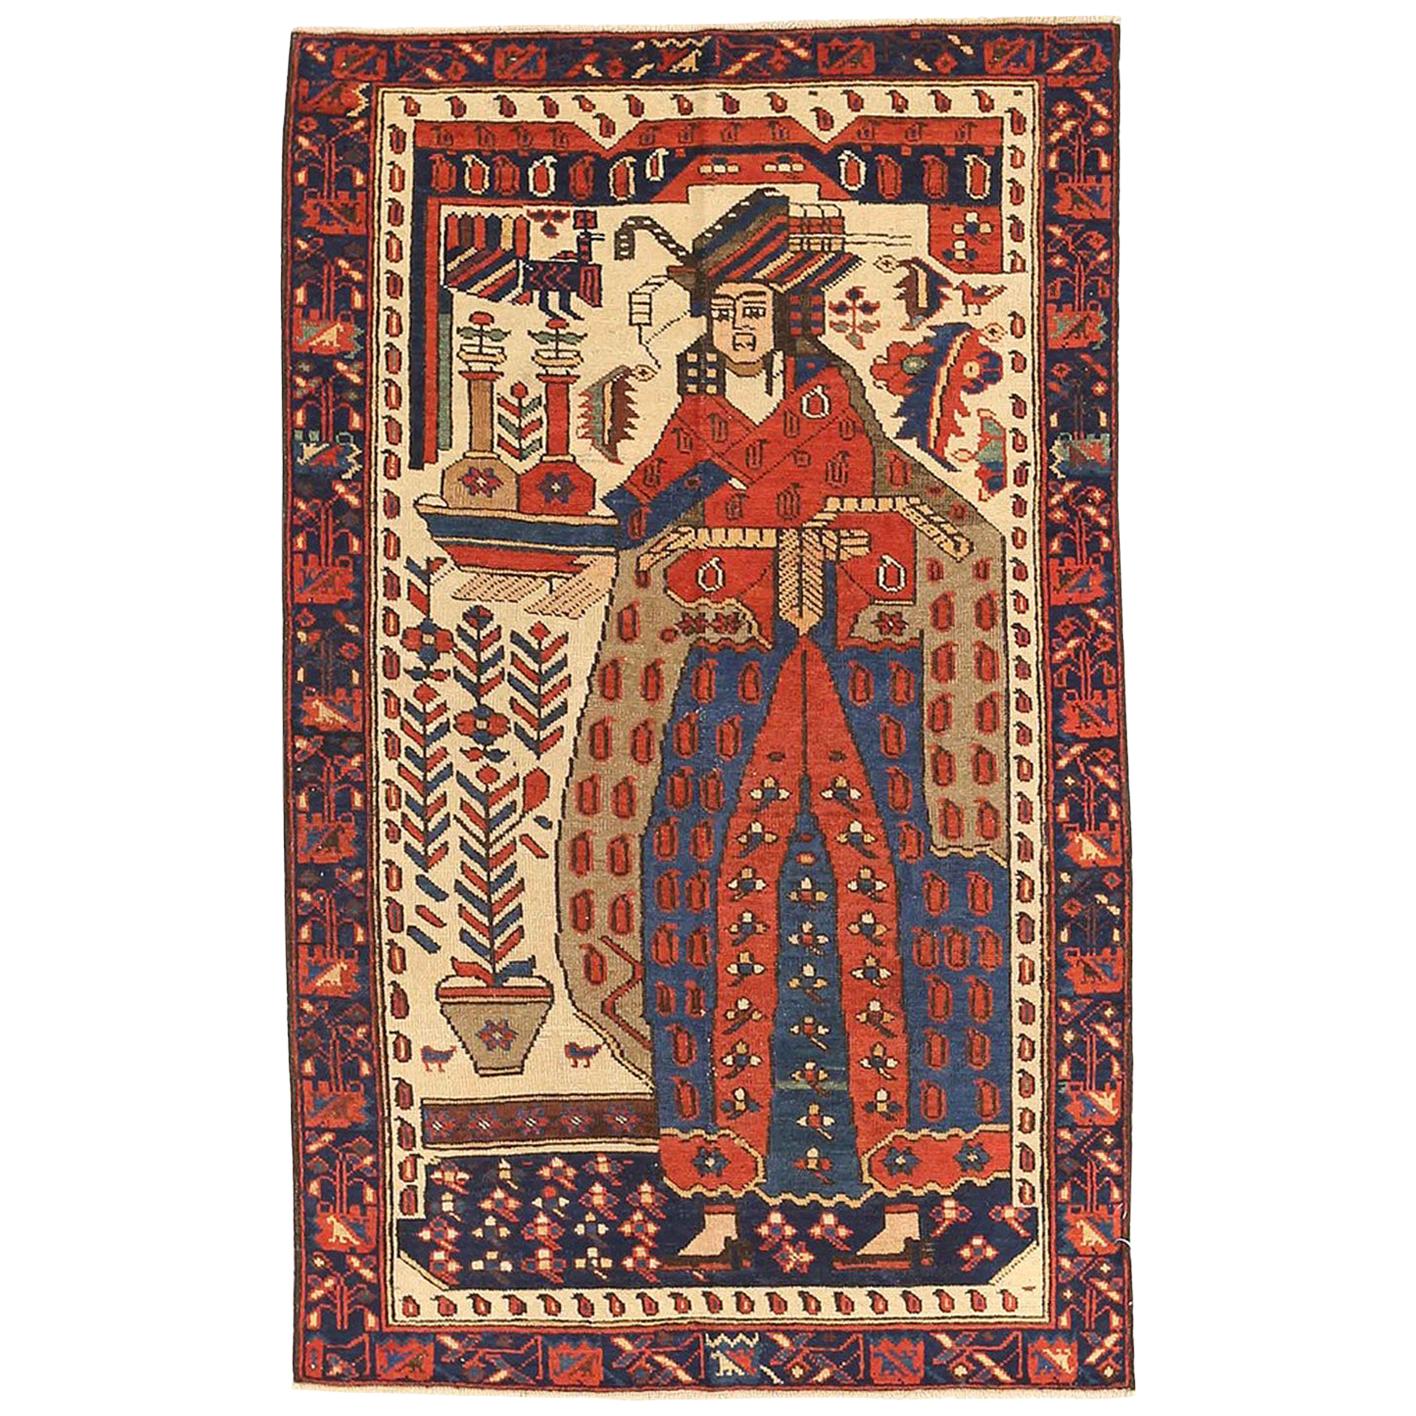 Antique Persian Baluch Rug with a Portrait Pattern in Navy and Red